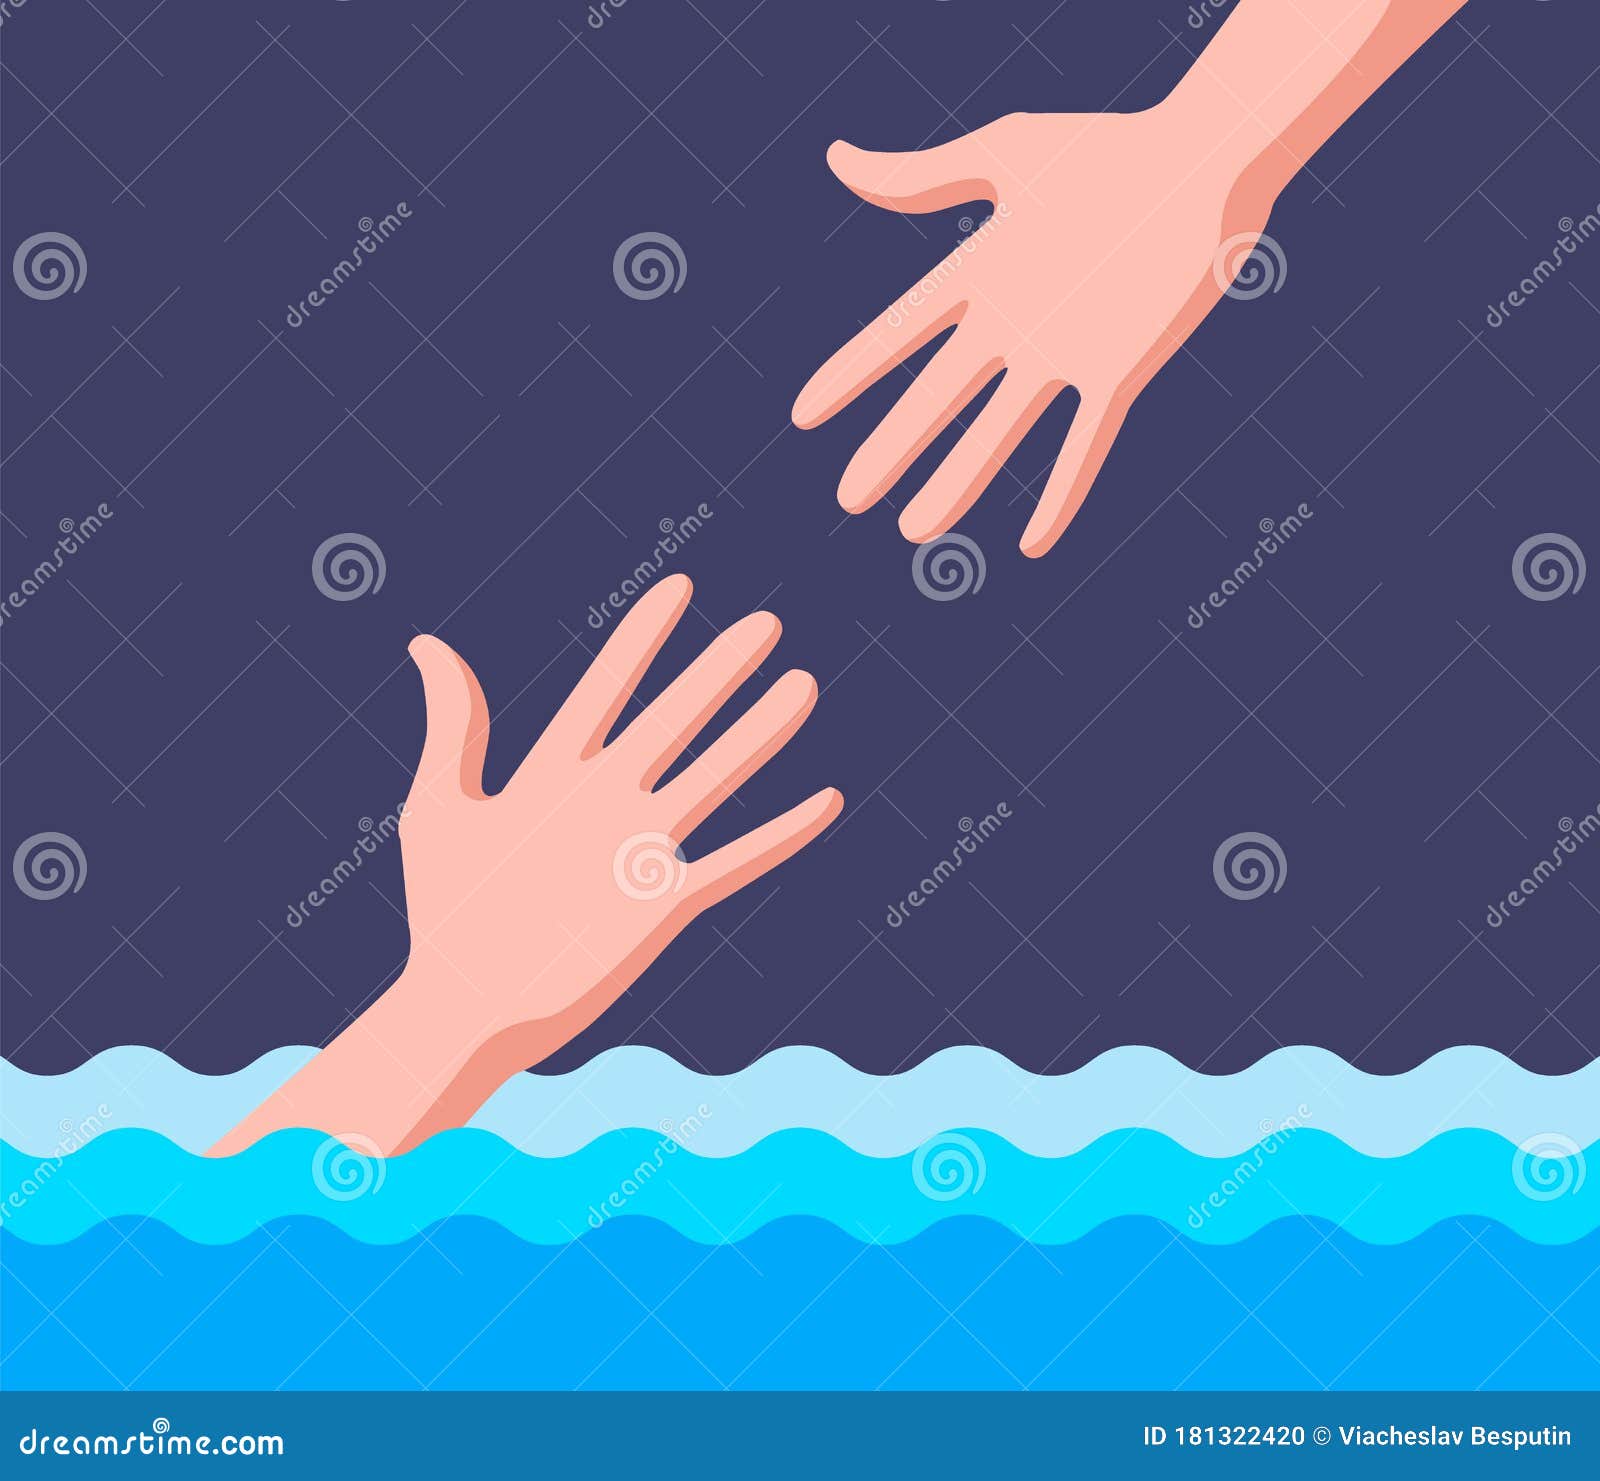 Lifeguard Helps a Drowning Man in Water. Stock Vector - Illustration of ...